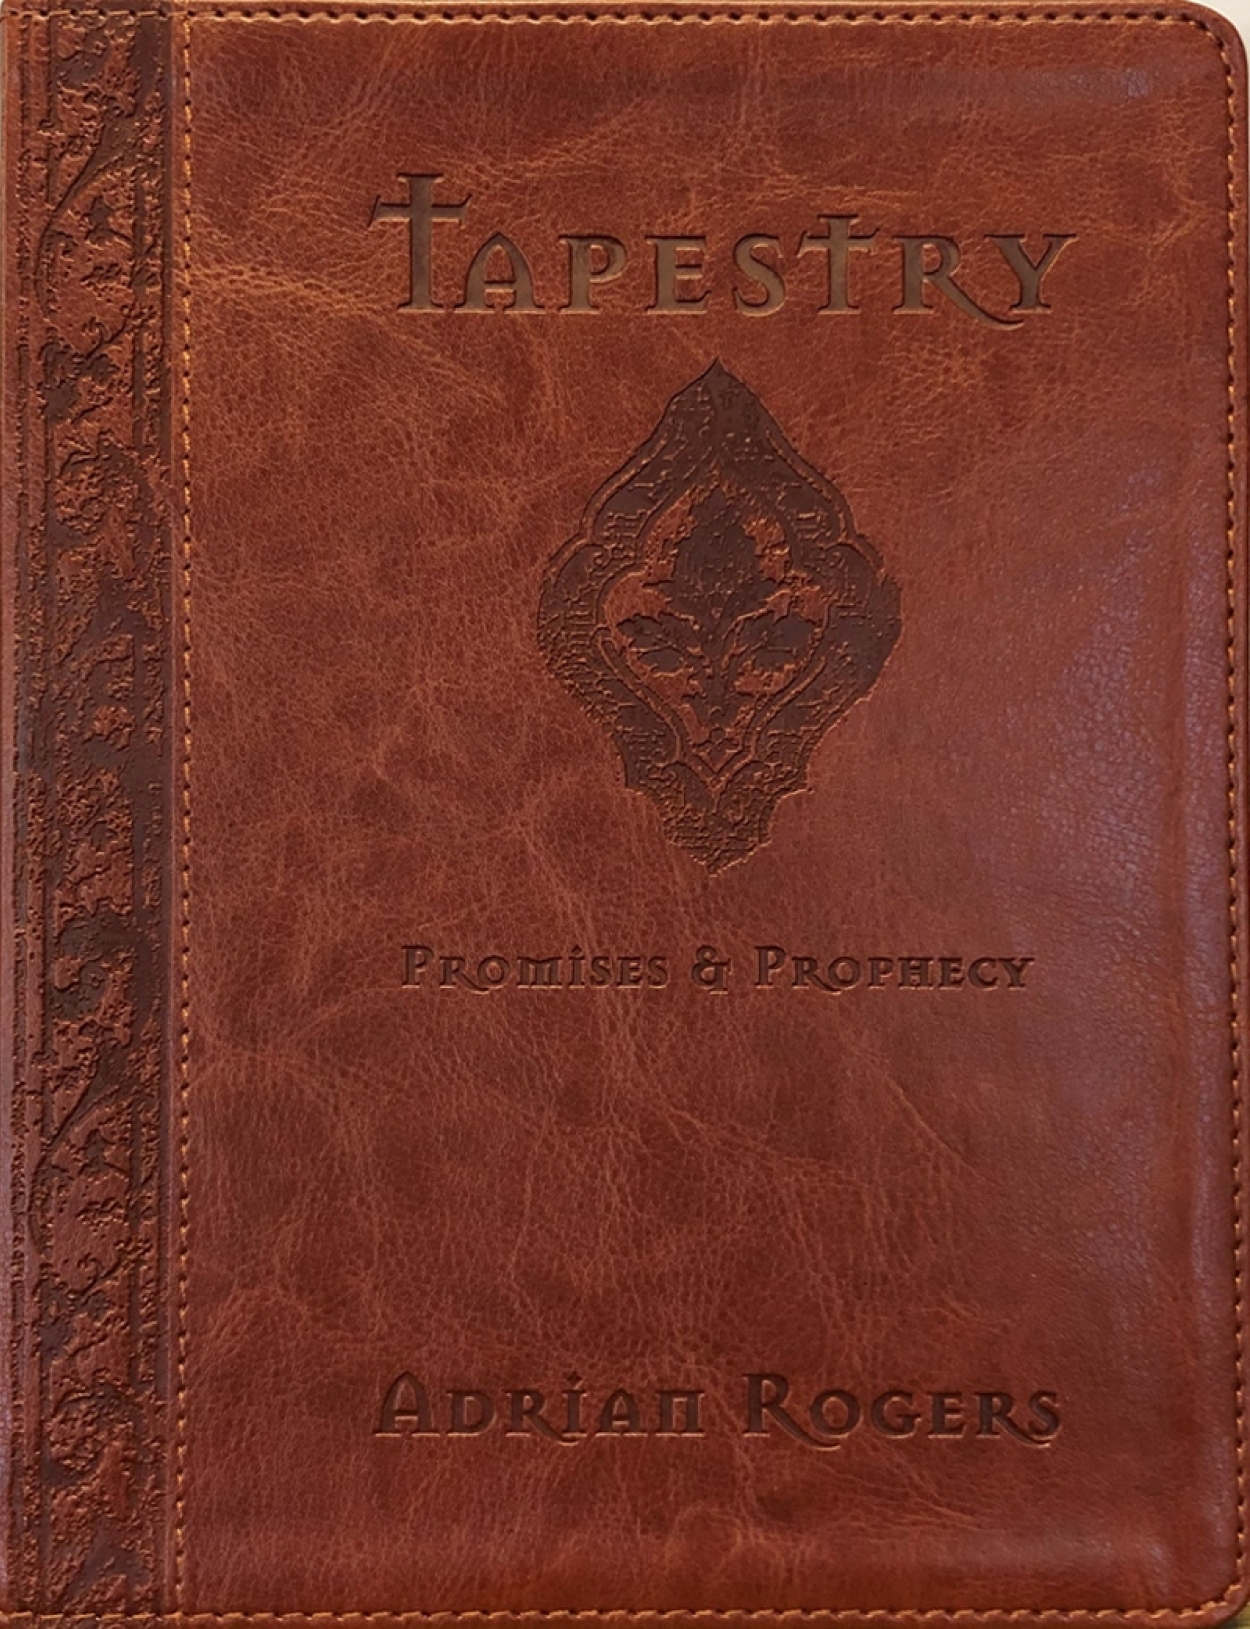 Tapestry promises and prophecy journal b121